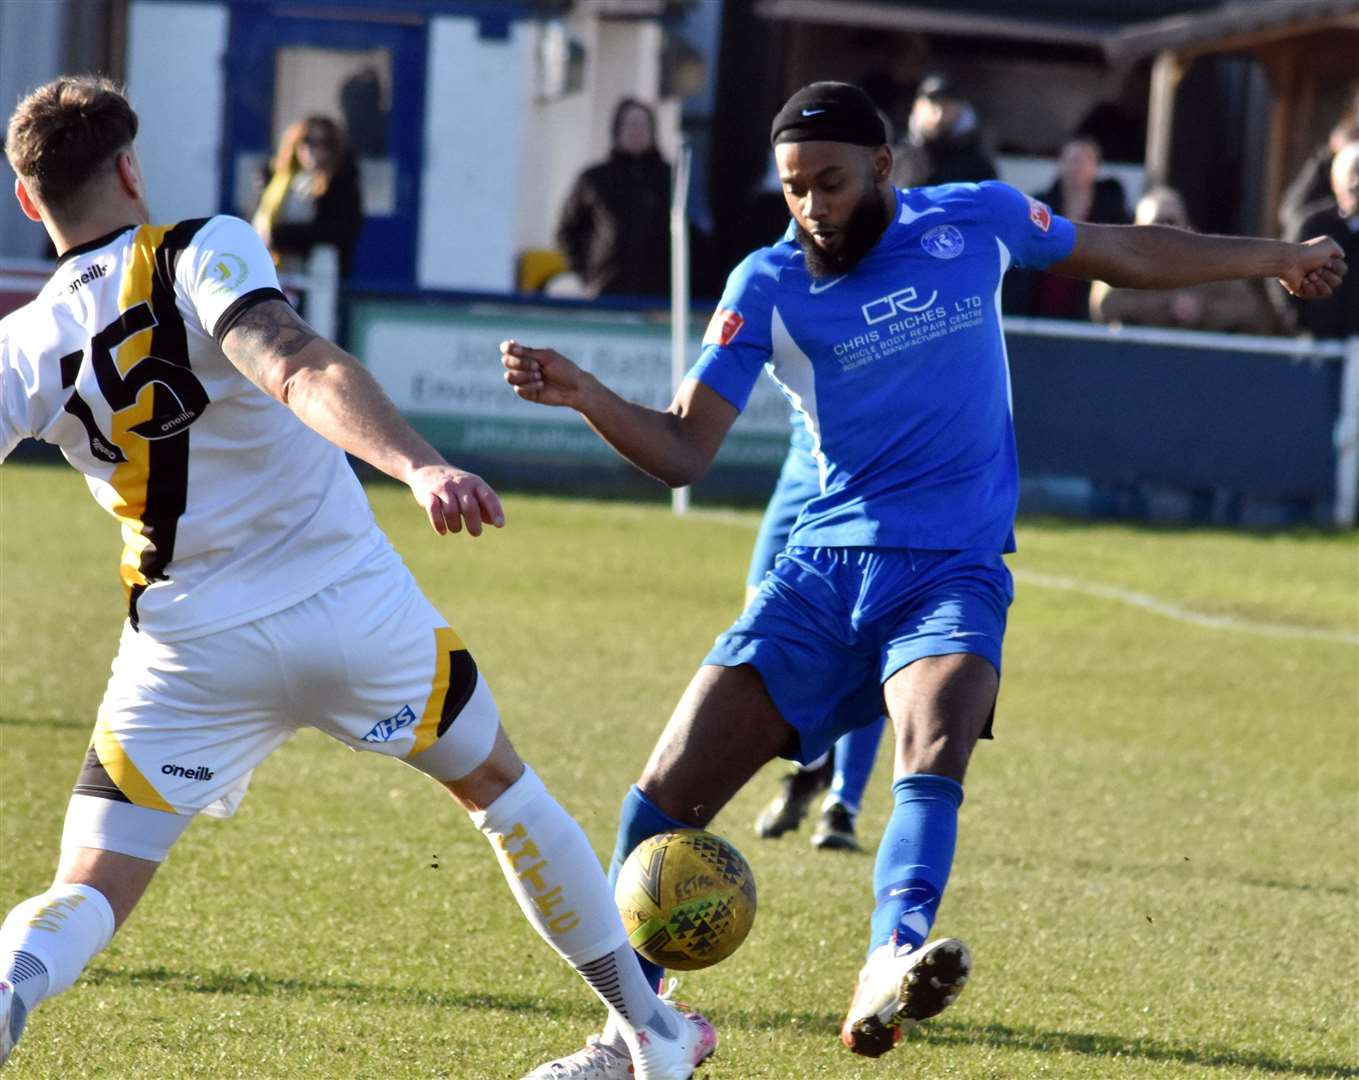 Herne Bay striker Zak Ansah claimed a hat-trick in the win at Lancing but he couldn't find the net at Faversham on Tuesday. Picture: Randolph File